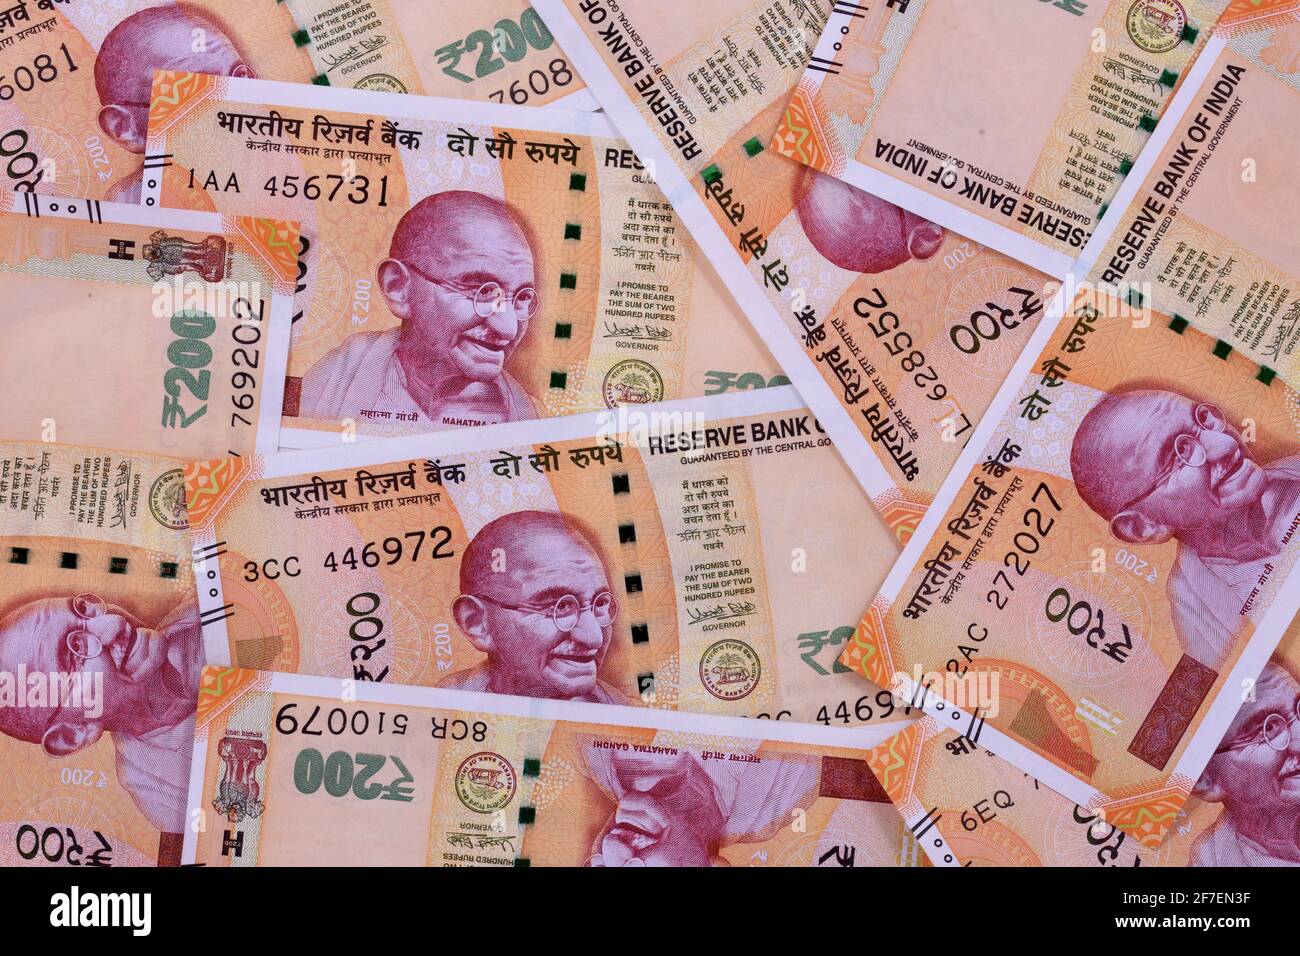 New Indian currency of 200 rupee notes background Stock Photo